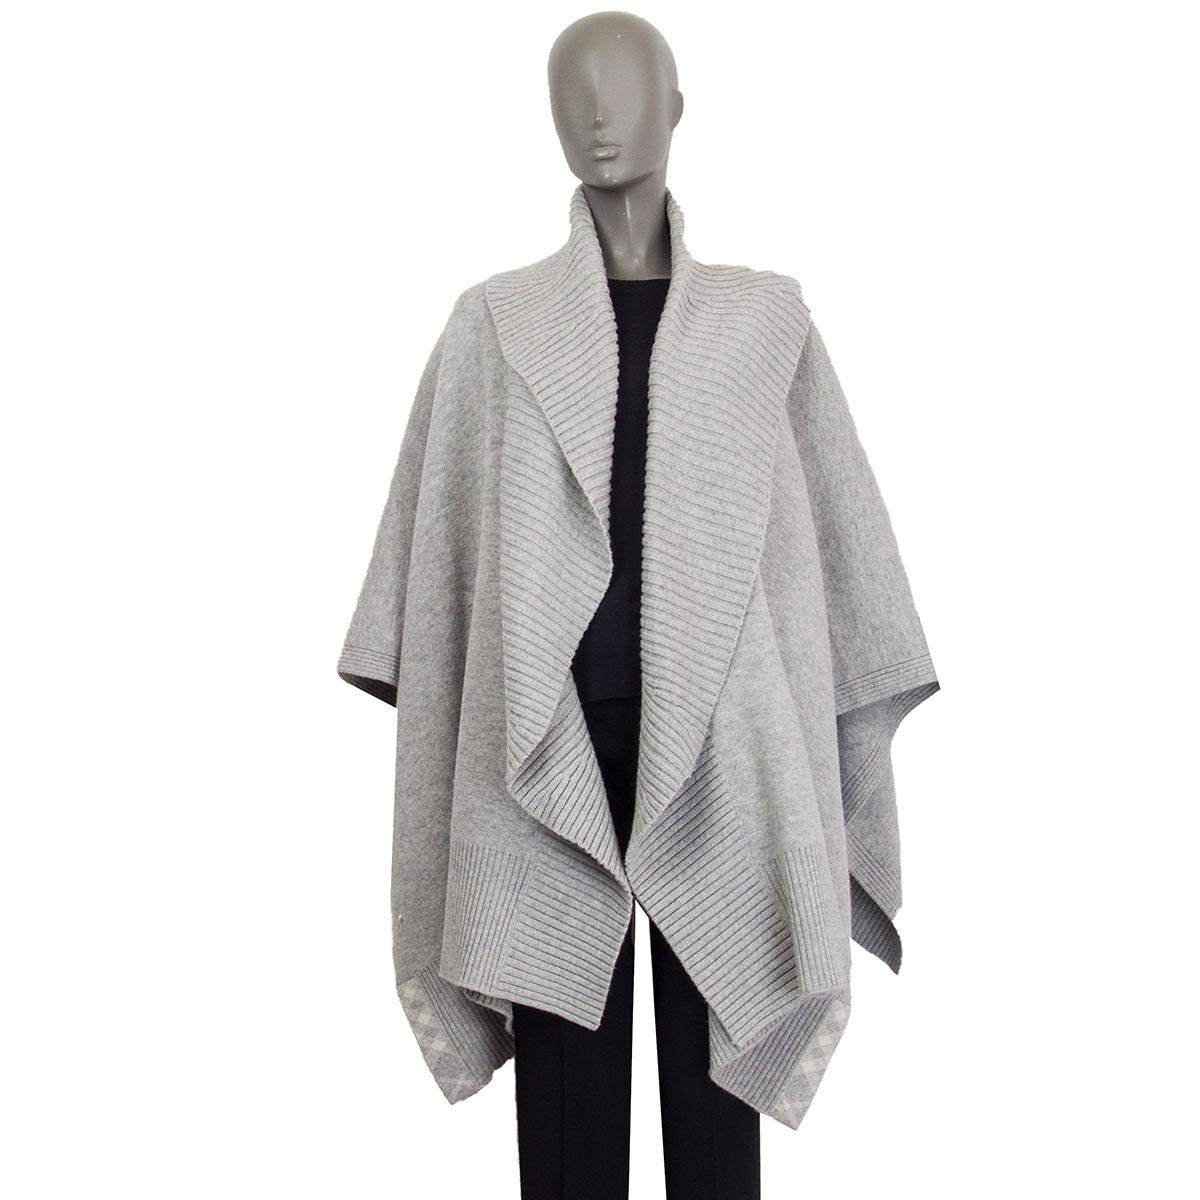 Burberry London open poncho in light-gray wool (71%) and cashmere (27%) with a wide shawl ribbed collar and longer on the front. Unlined. Has been worn and is in excellent condition.

Tag Size One Size
Size One size
Length 87cm (33.9in)